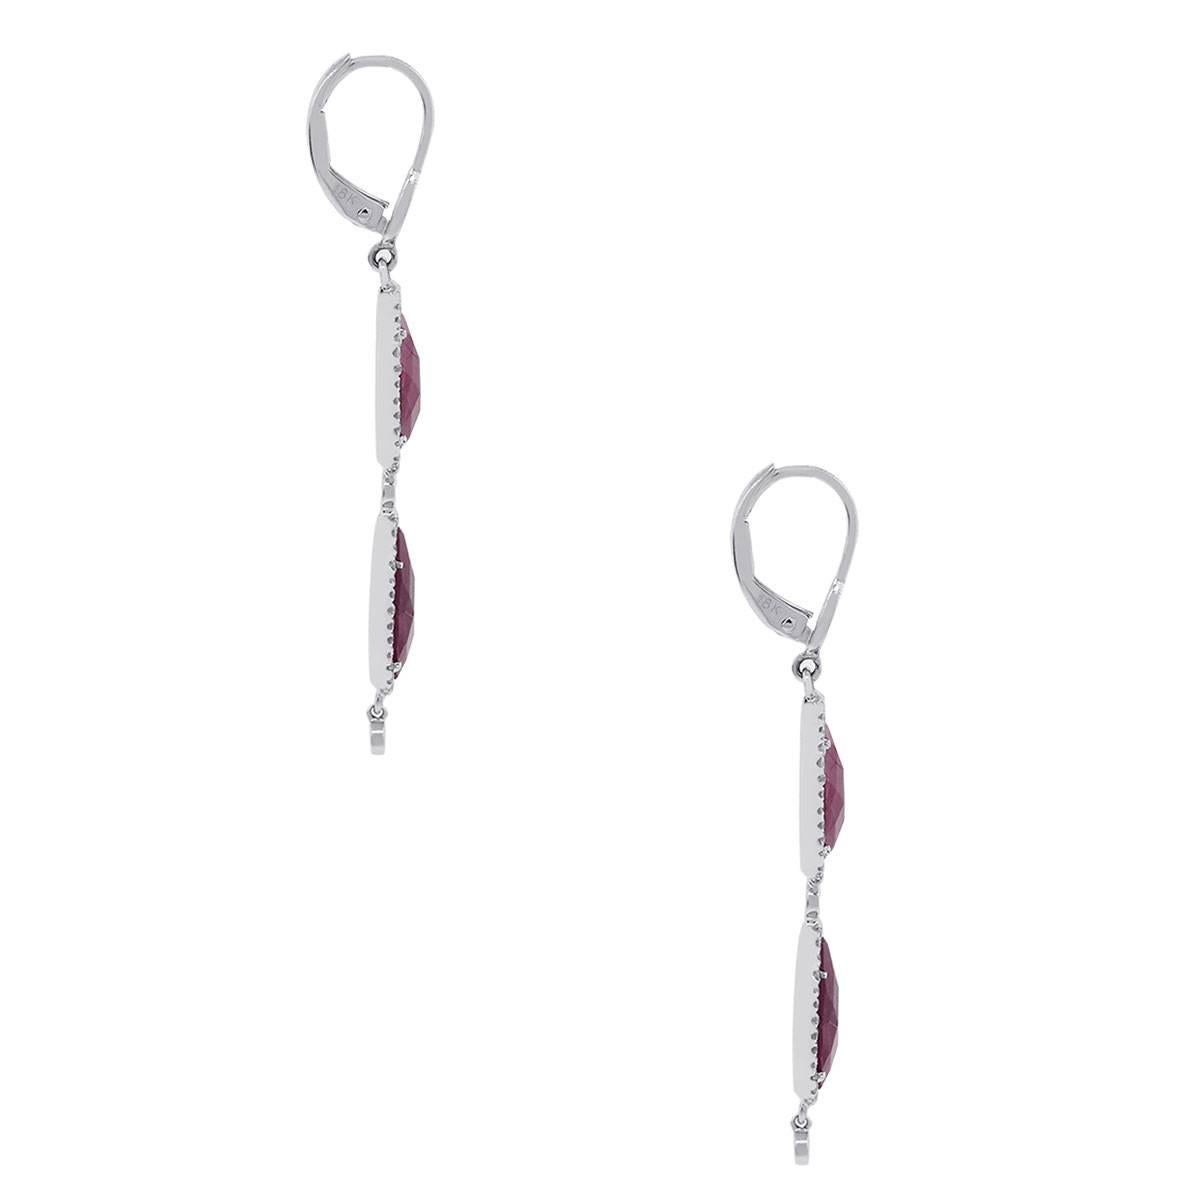 Designer: Meira T
Style: Ruby and diamond earrings
Material: 18k White Gold
Diamond Details: Approximately 0.51ctw of round brilliant diamonds. Diamonds are G/H in color and SI in clarity
Gemstone Details: Approximately 6.15ctw ruby gemstones
Size: